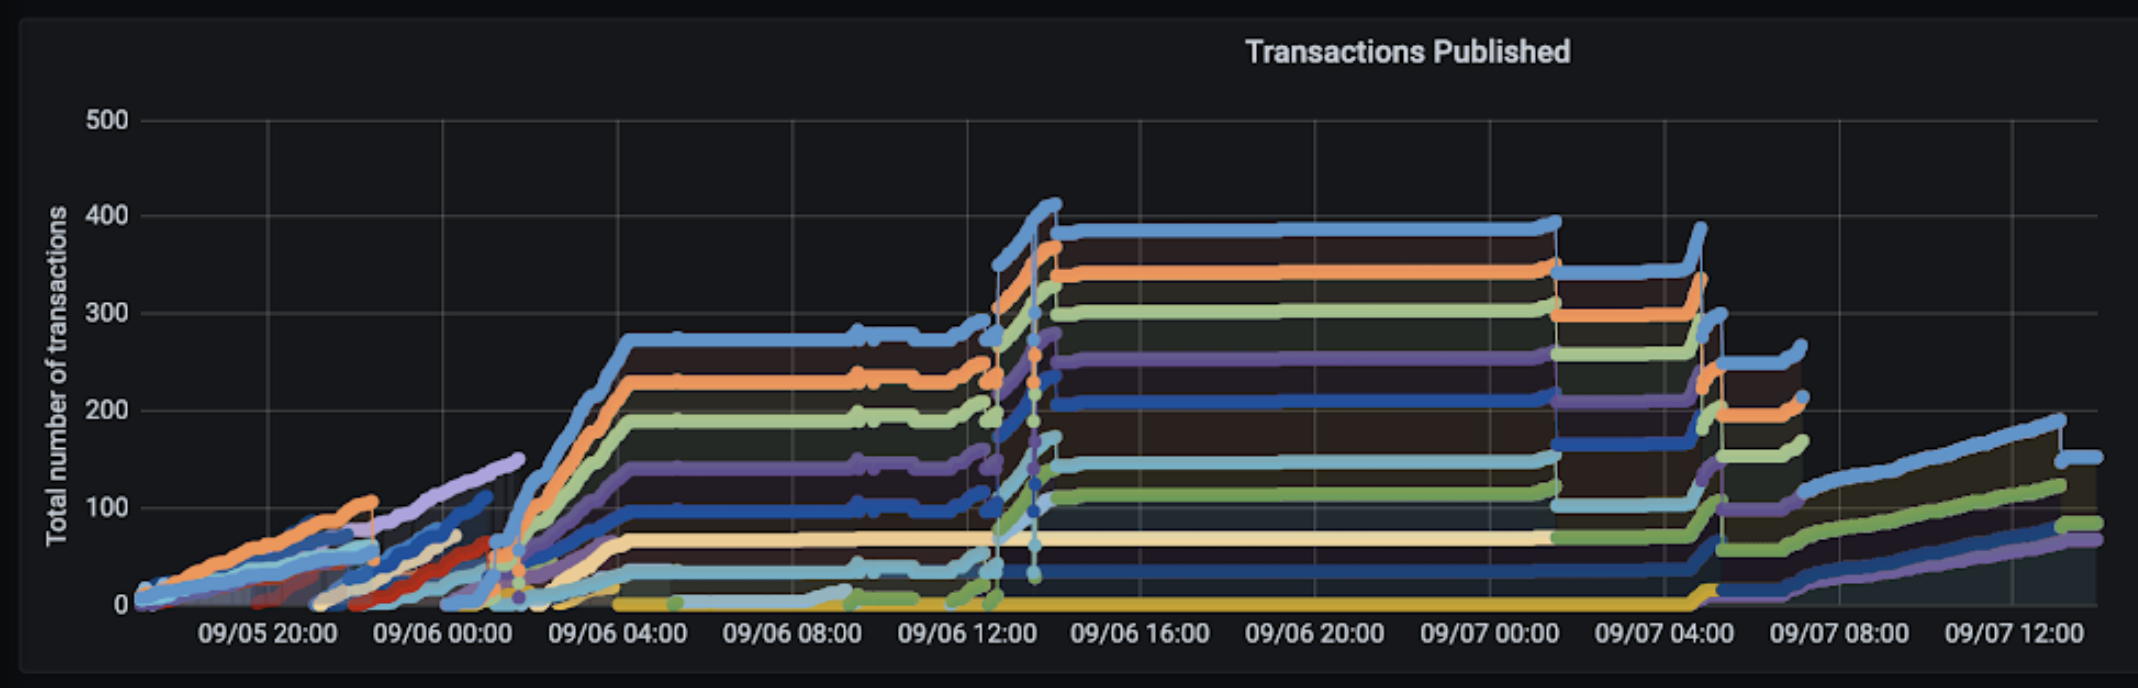 Total Transactions Published of Scale Out Benchmark